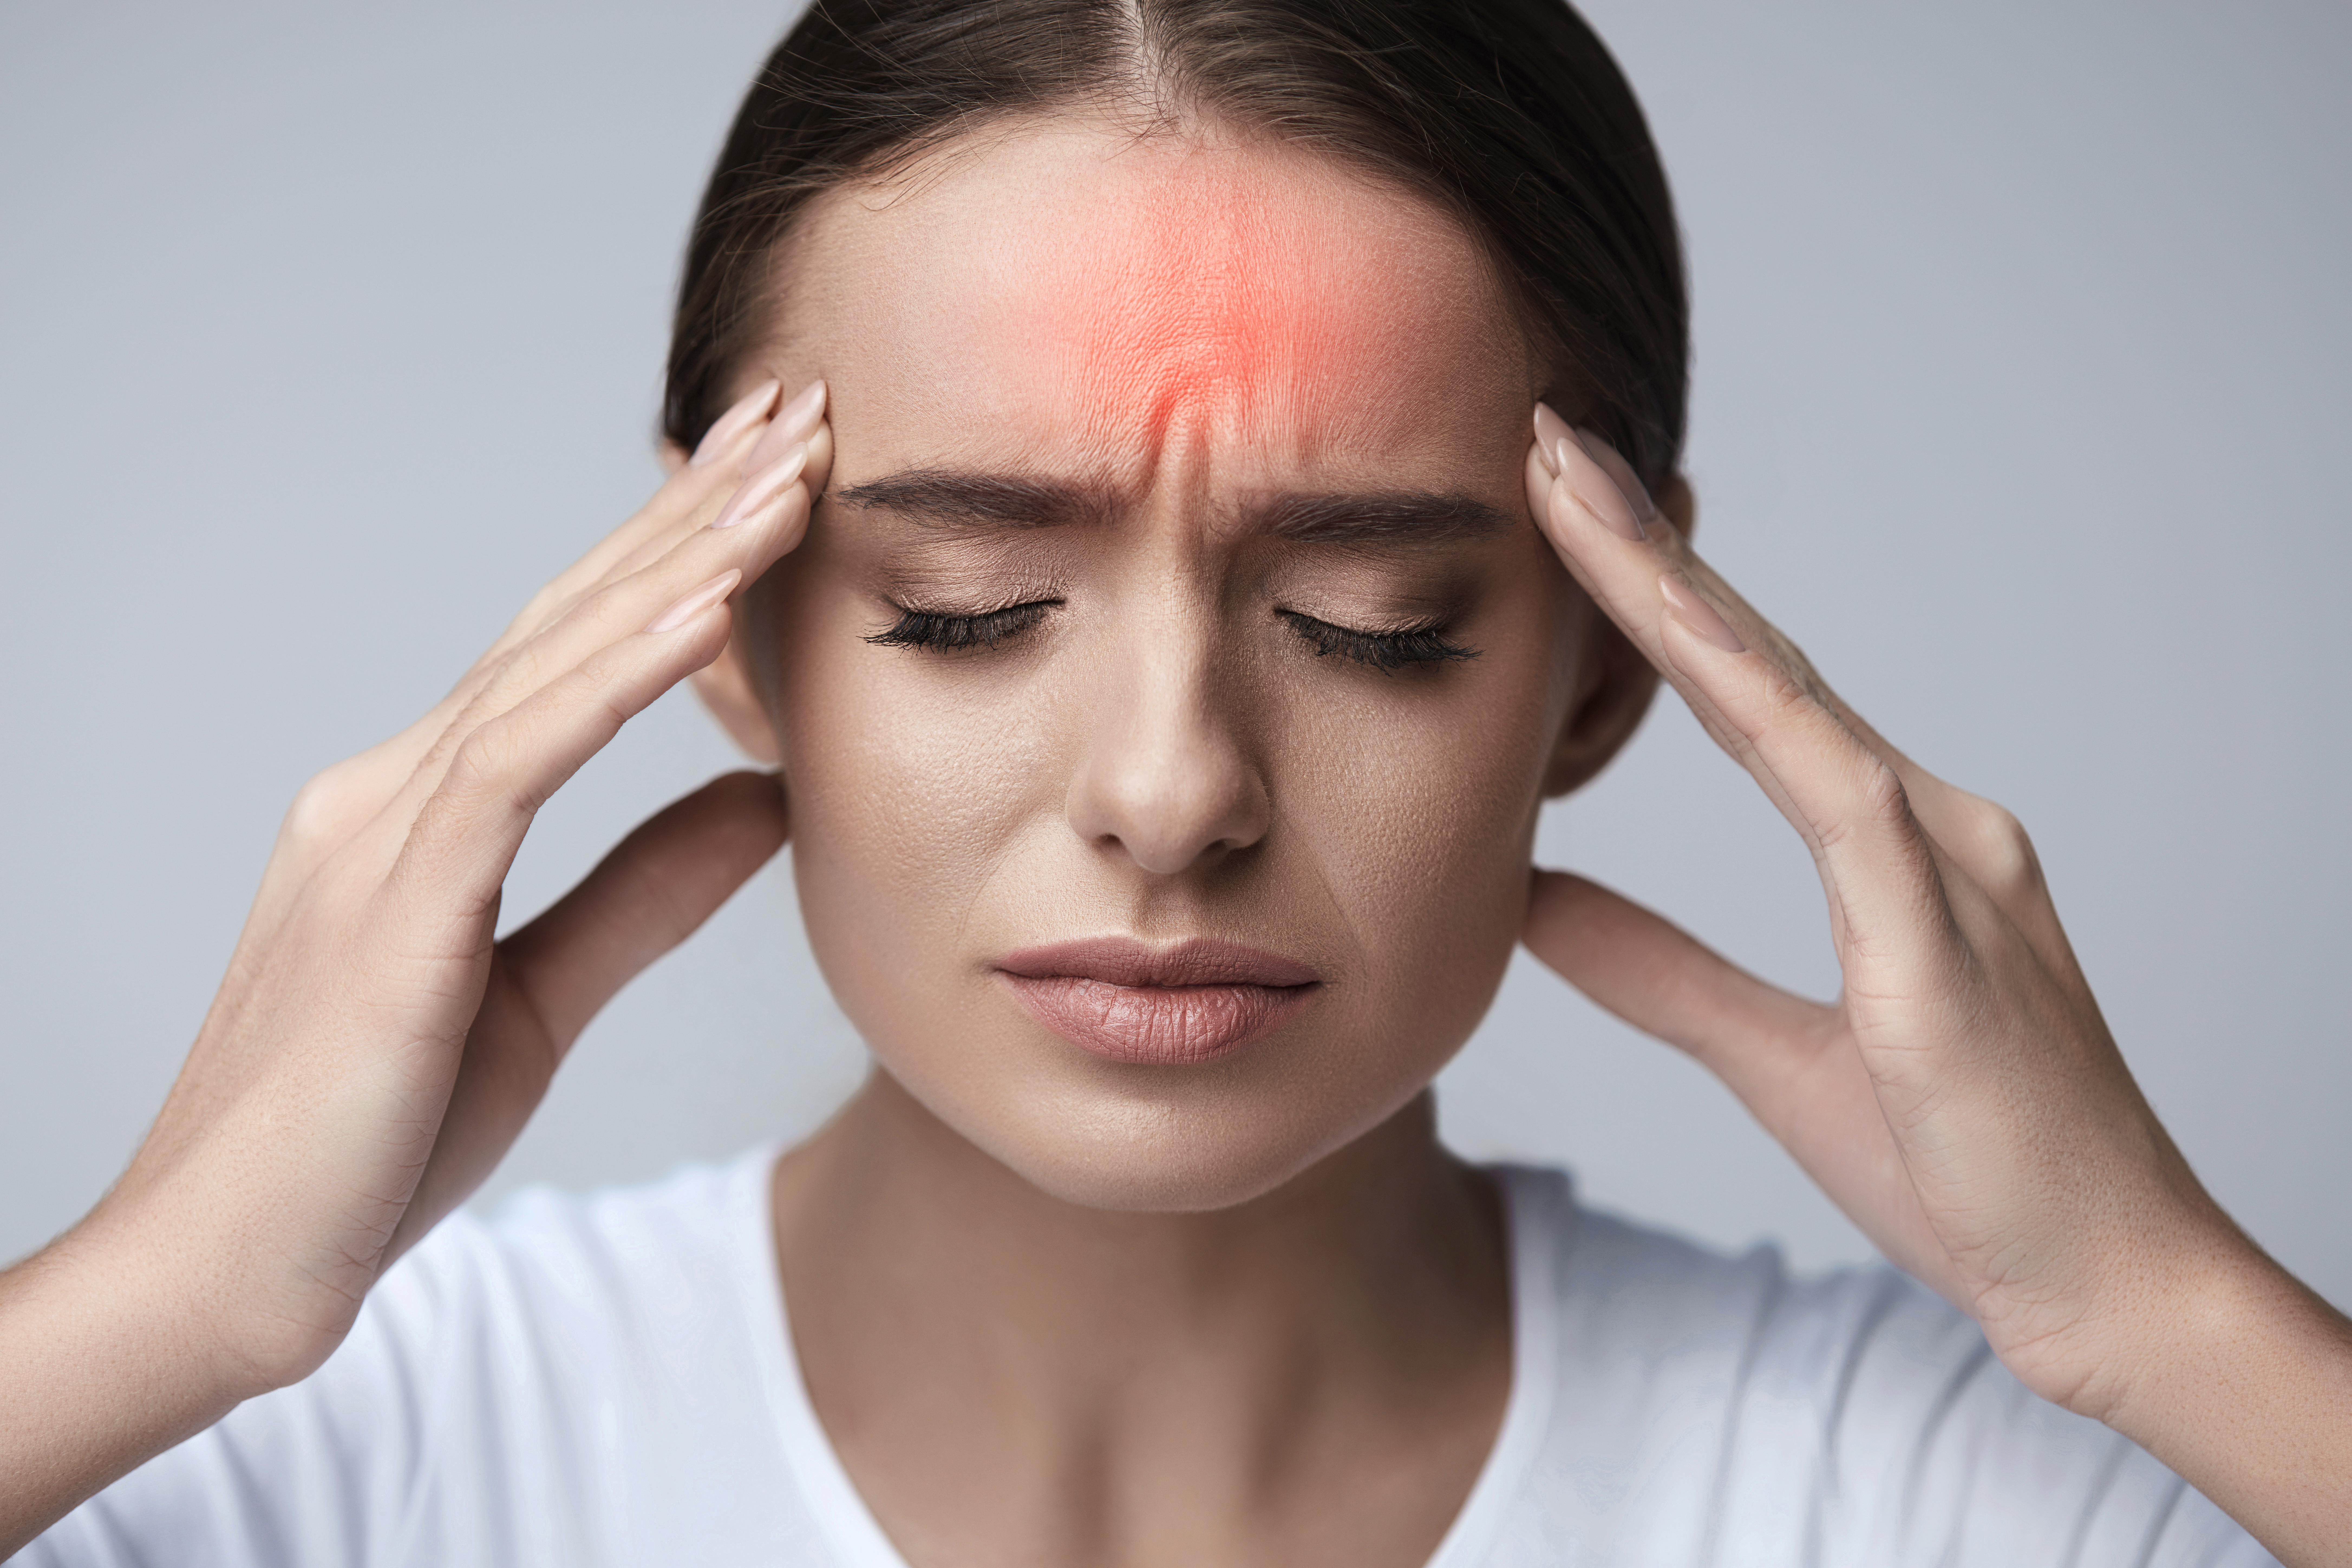 Photo illustration of a woman with a headache